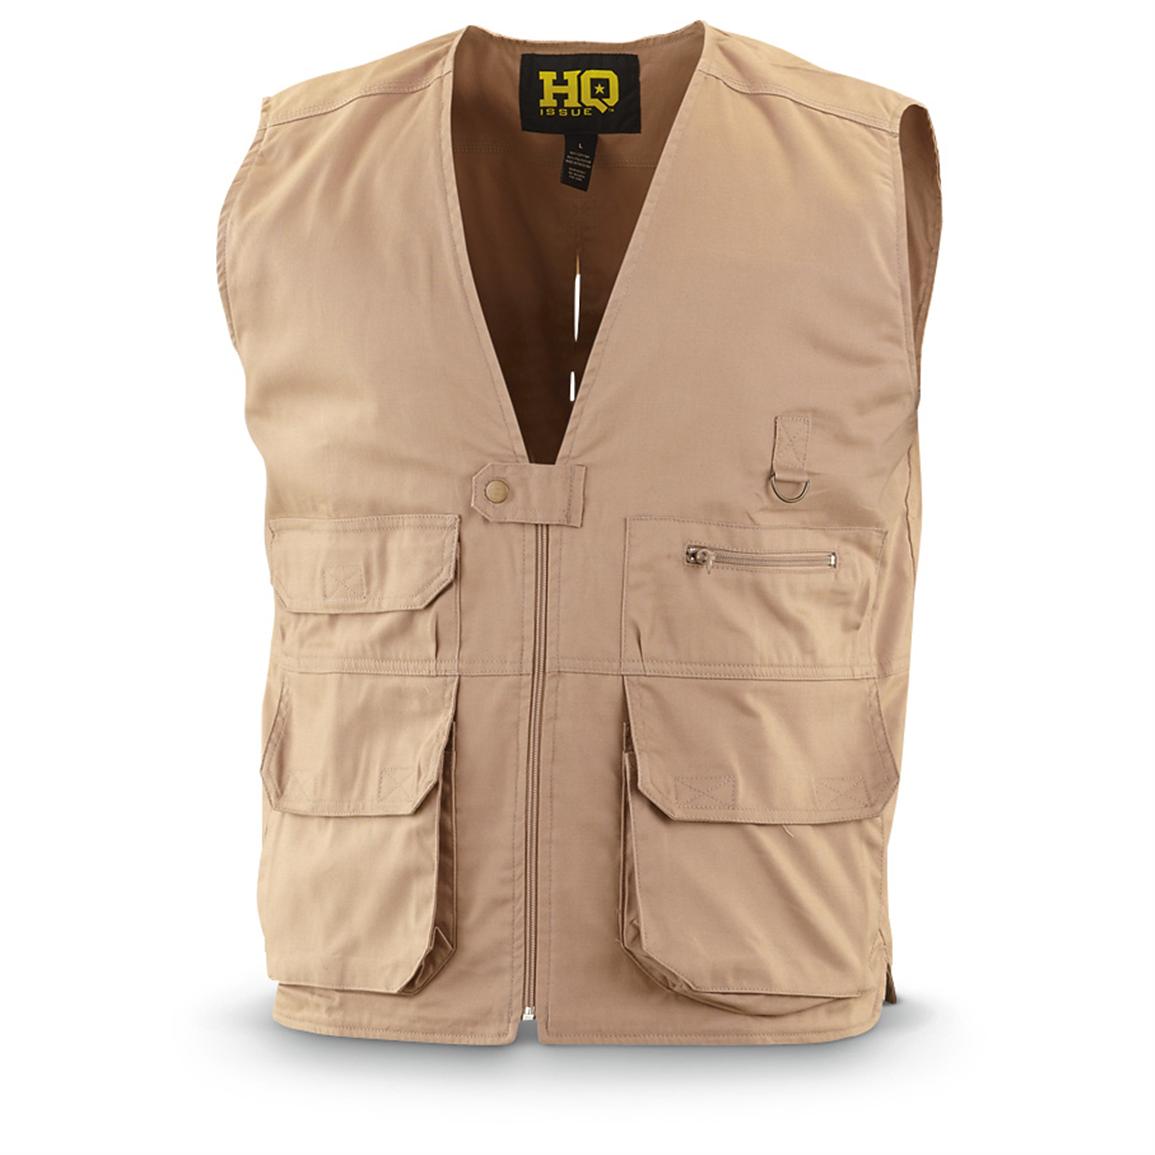 HQ ISSUE Concealment Vest - 296801, Holsters at Sportsman's Guide